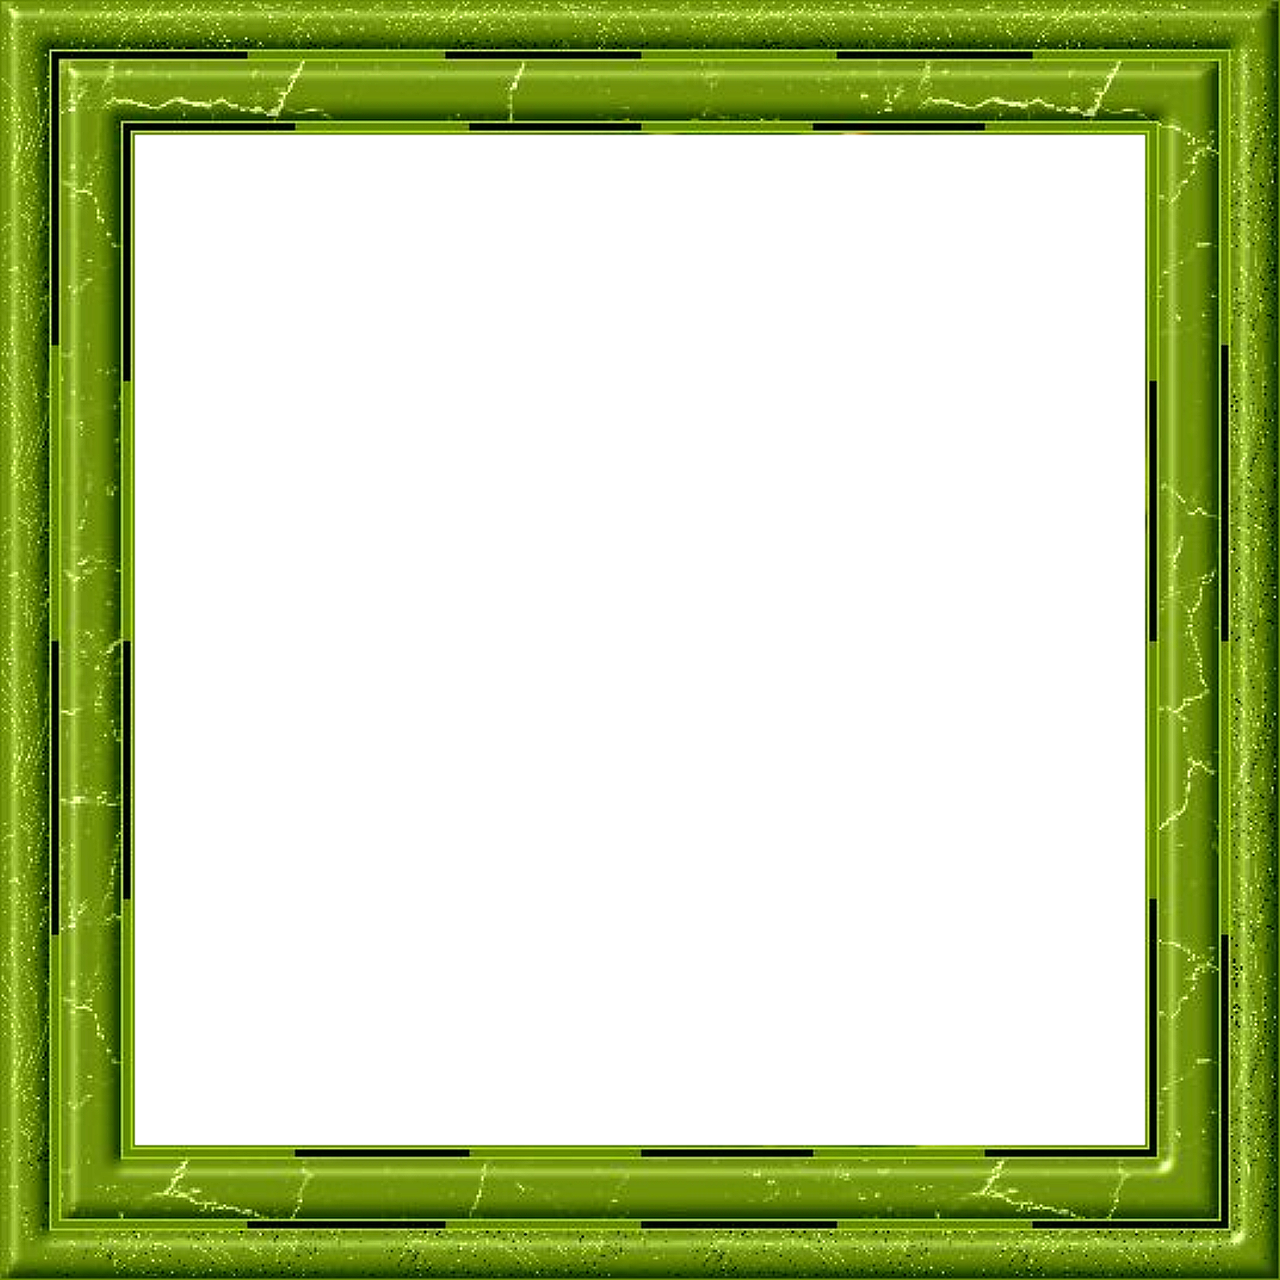 a green frame with a black background, flickr, digital art, stone, lime green, squared border, meme format